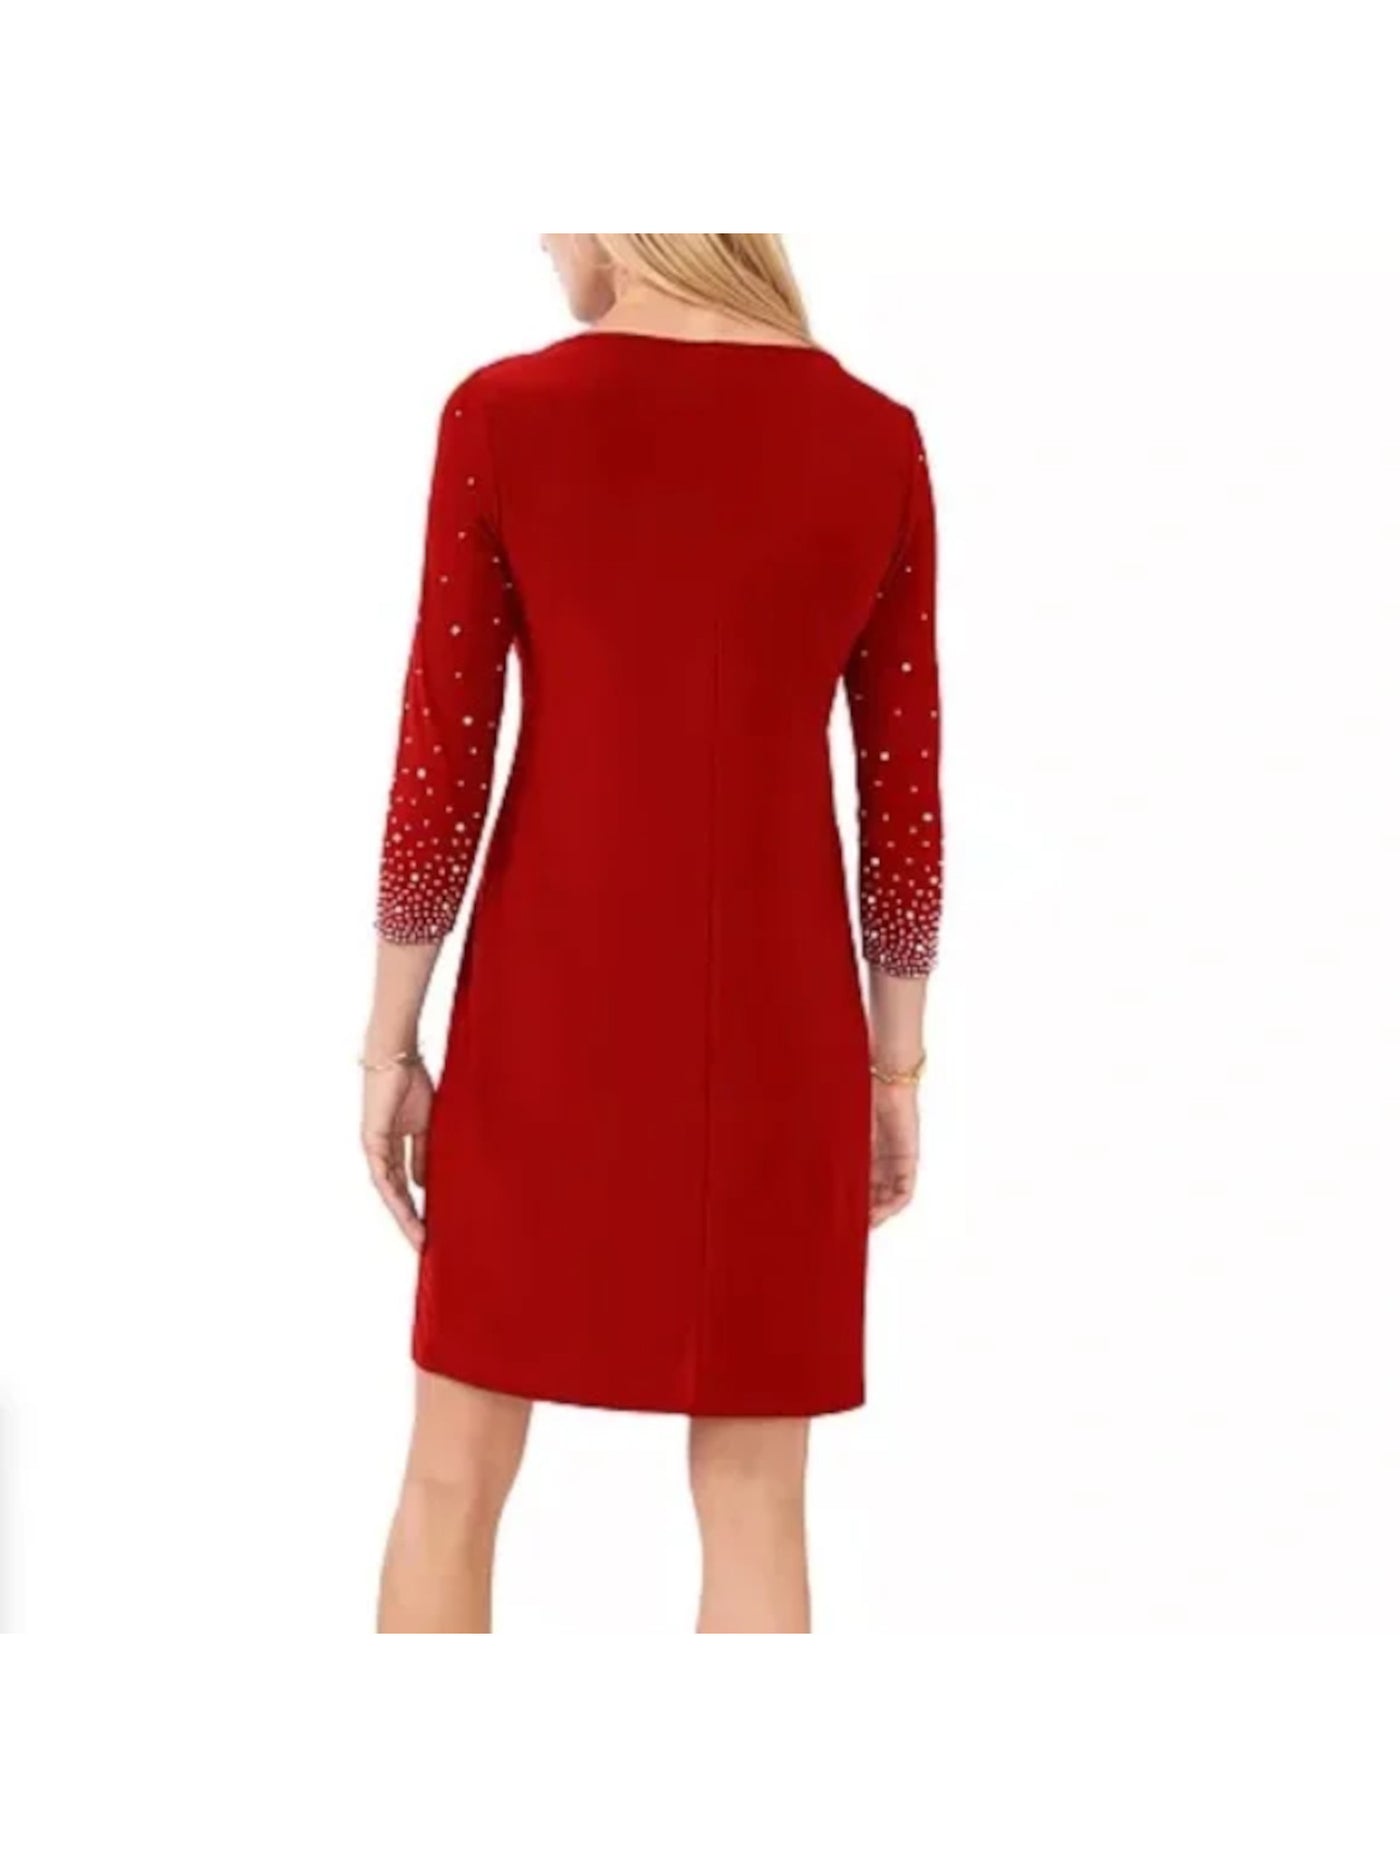 MSK Womens Red Embellished 3/4 Sleeve Boat Neck Above The Knee Cocktail Sheath Dress M